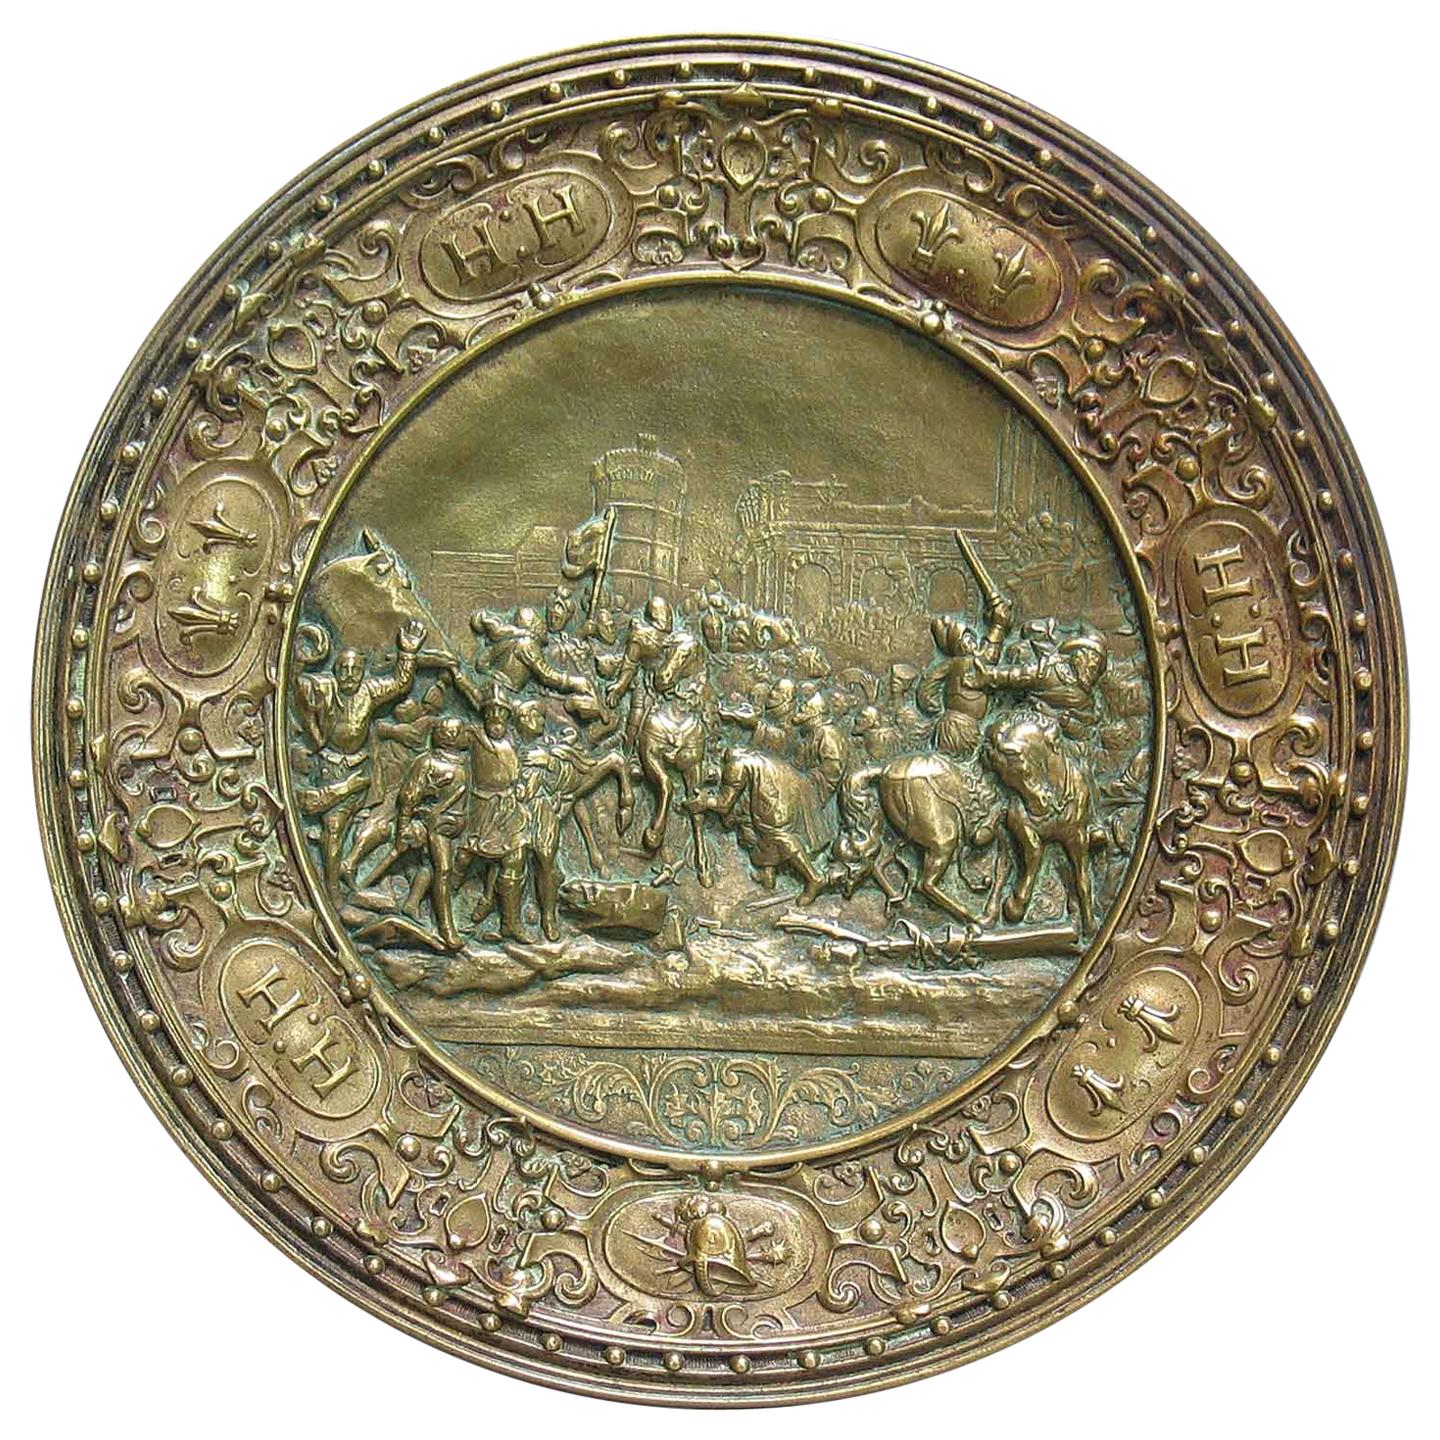 German Bronze Historicism Charger Depicting Entry of Henry IV into Paris in 1594